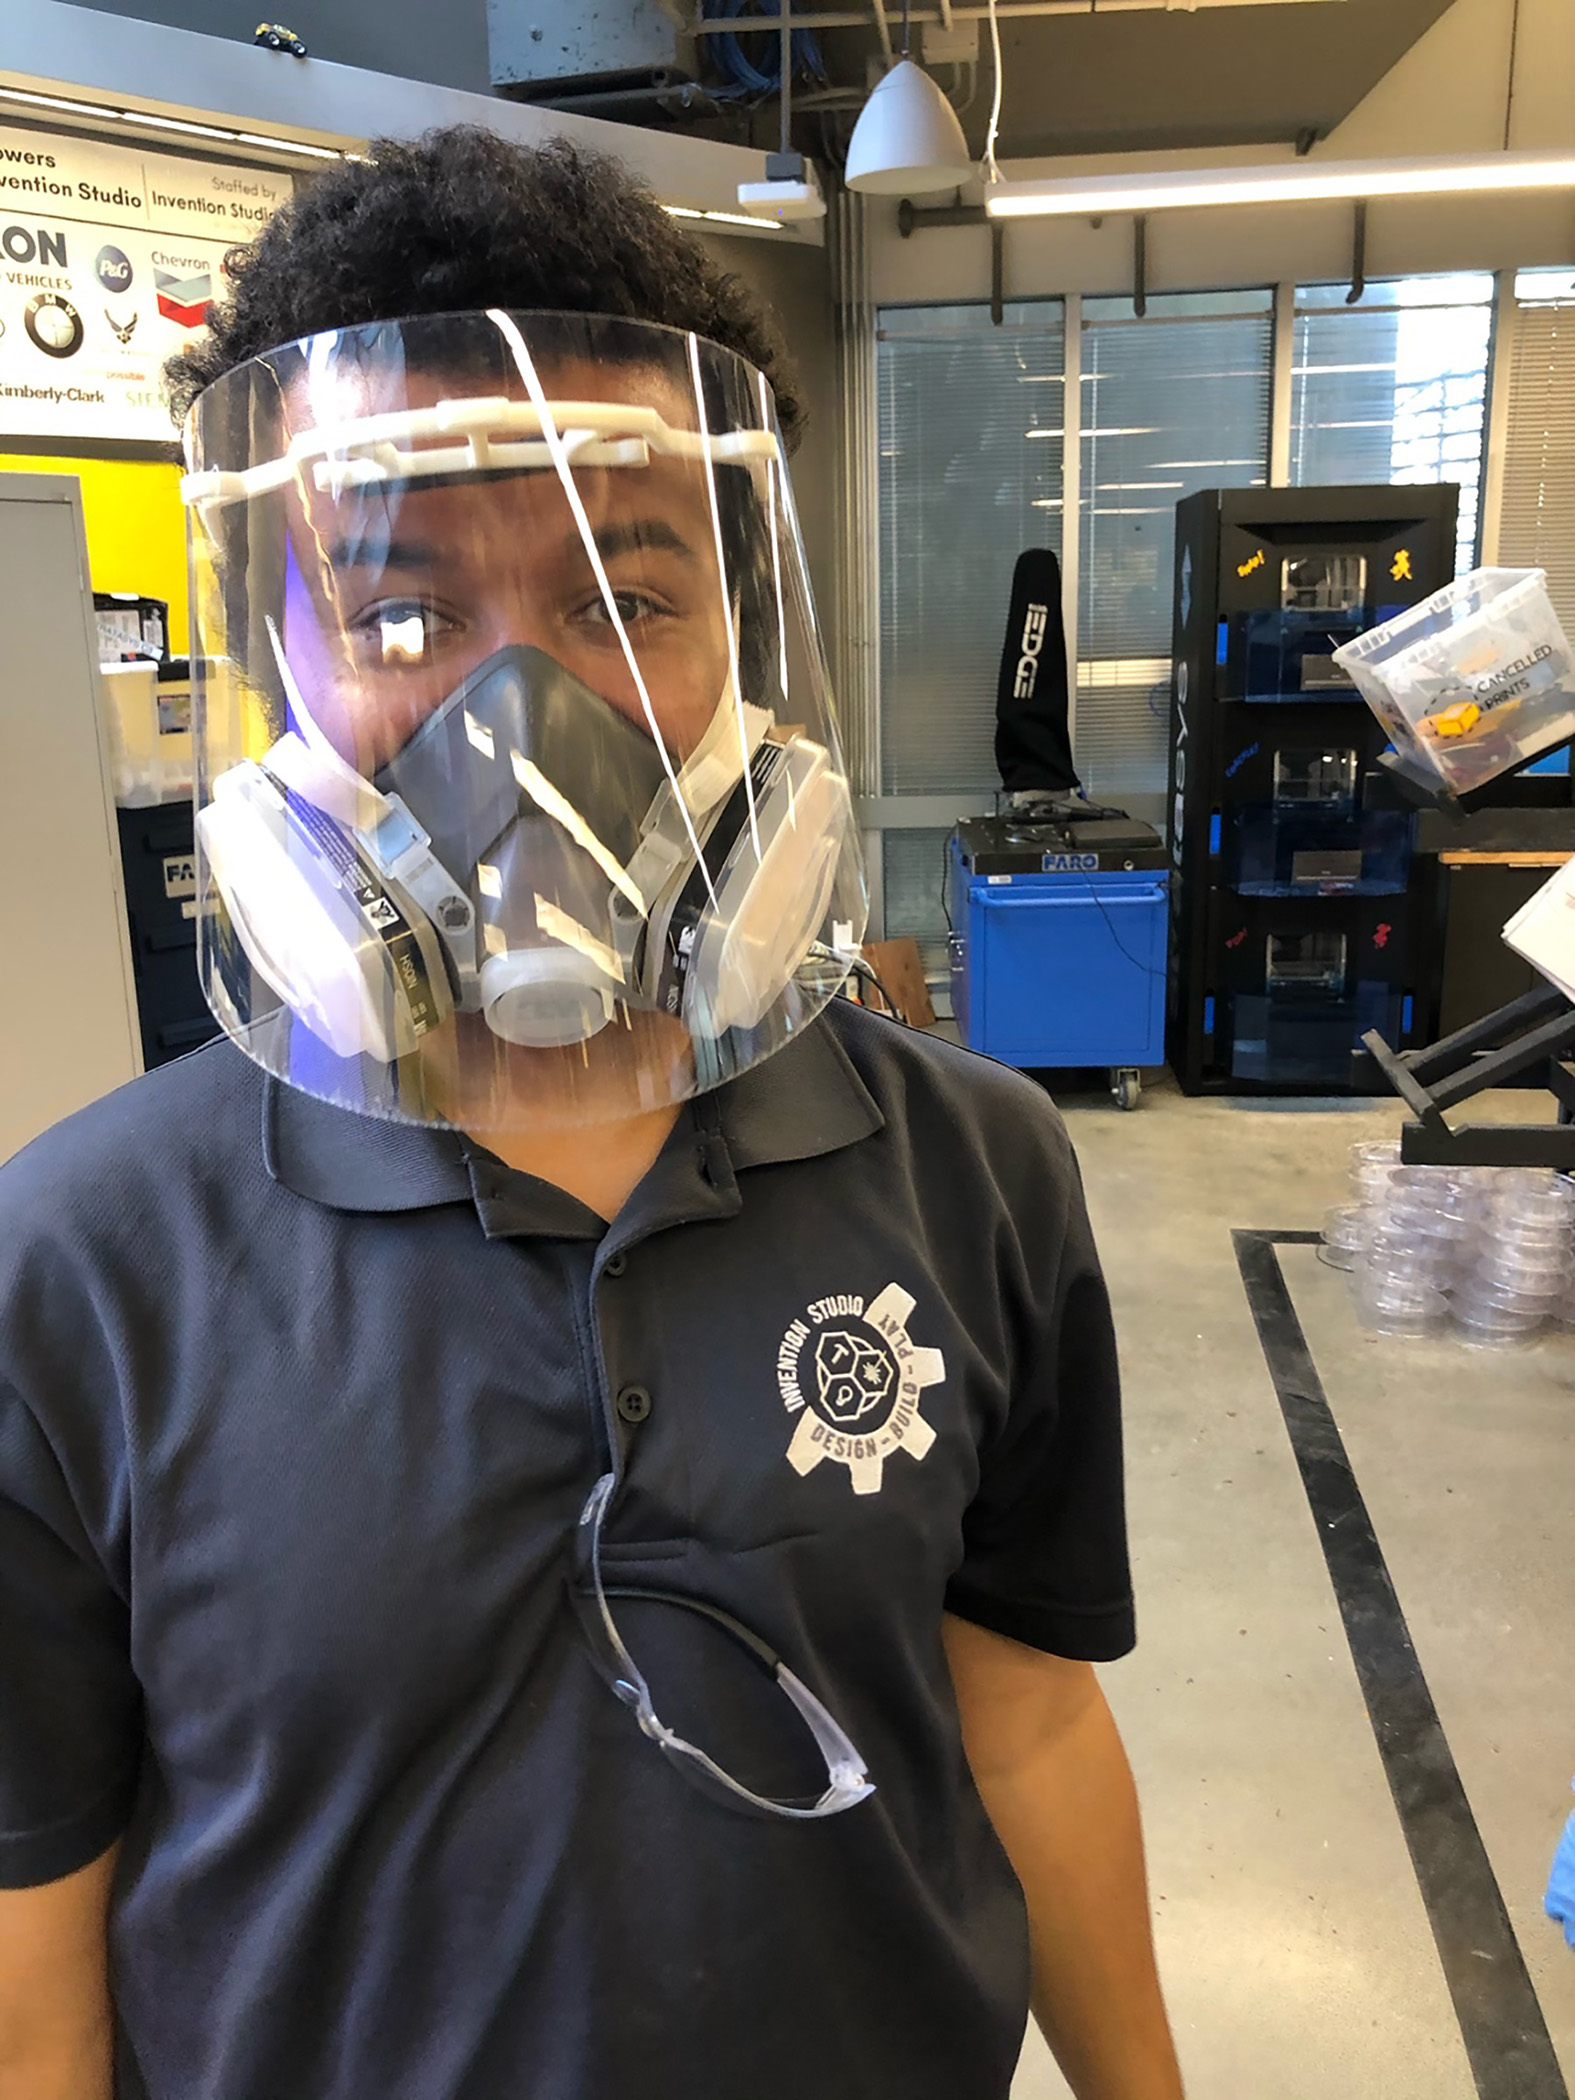 Georgia Tech is helping meet the need for face shields for health care workers.